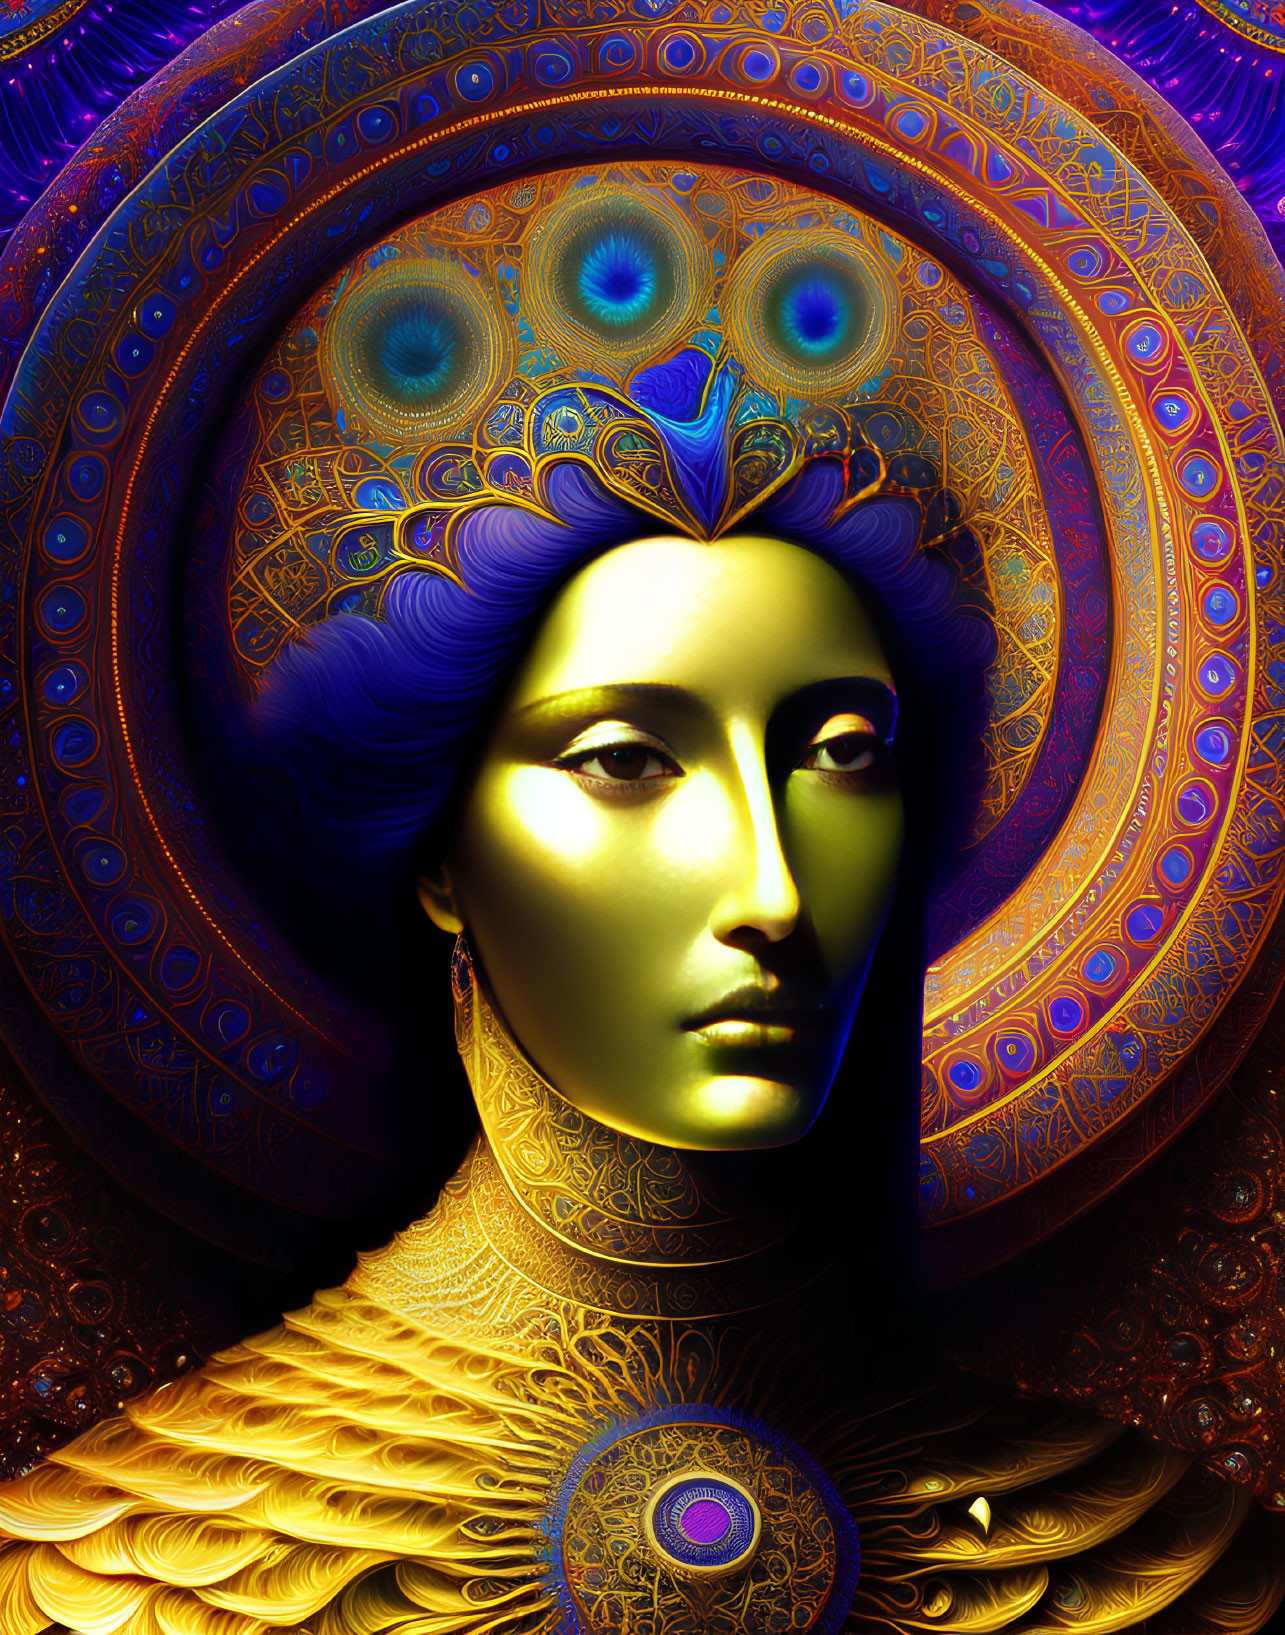 Colorful digital artwork: figure with golden skin, blue hair, peacock feather motifs, ornamental